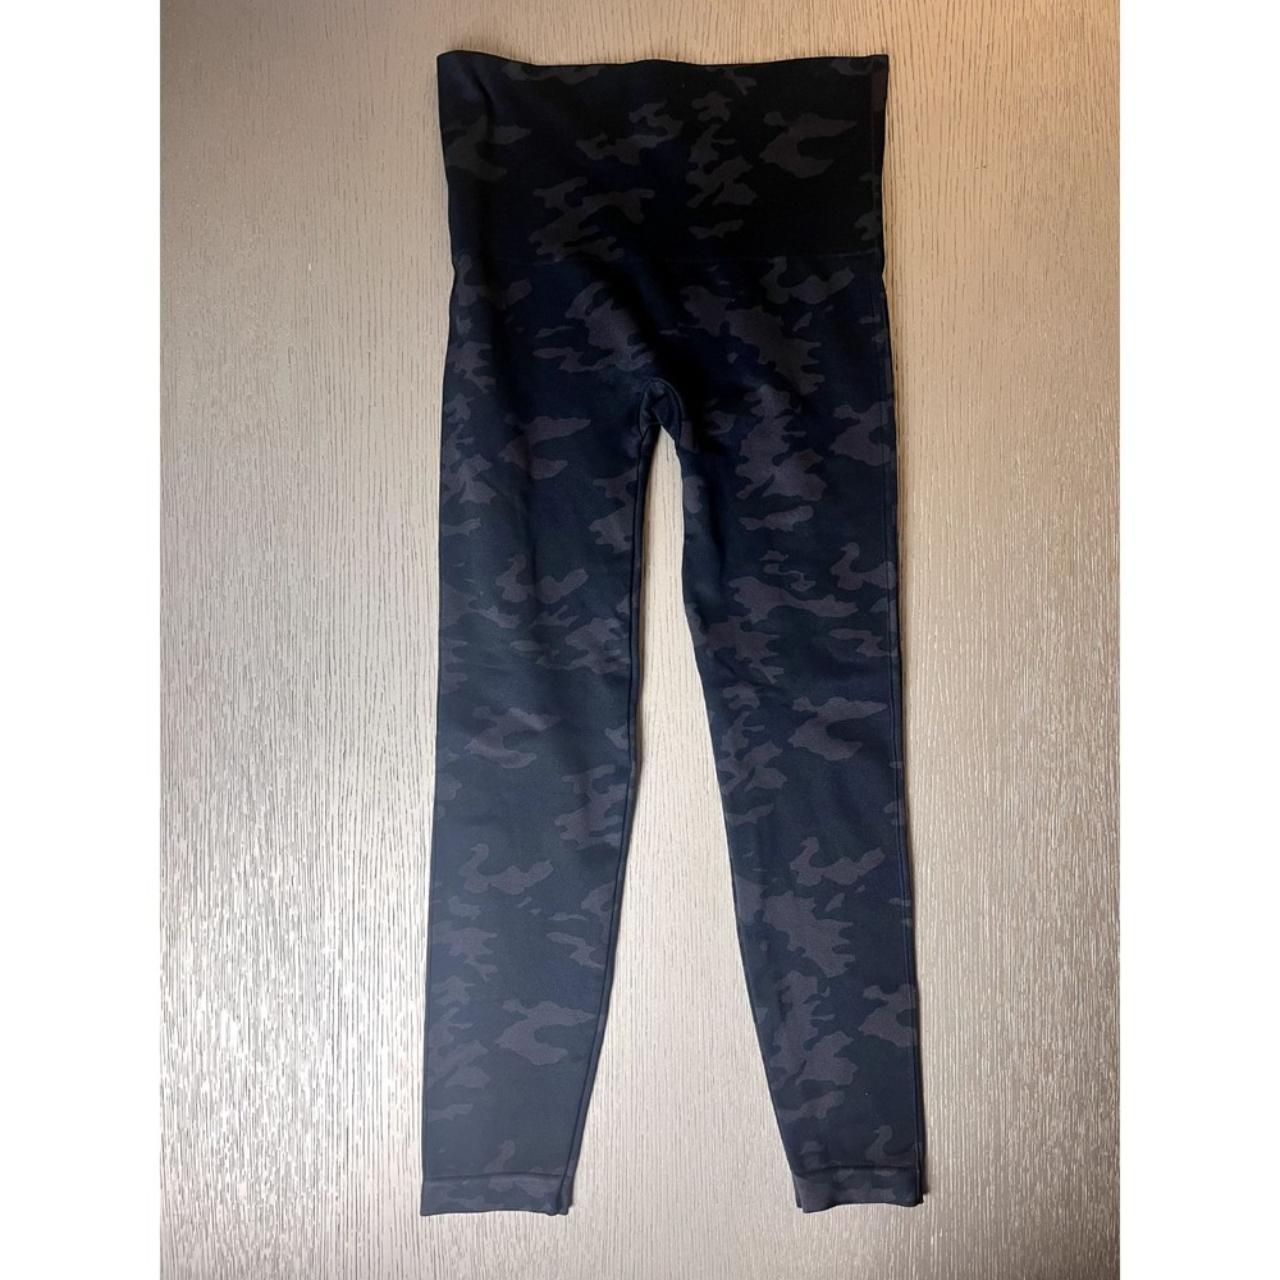 Spanx Women's Look at Me Now Leggings in Black Camo Size Small FL3515